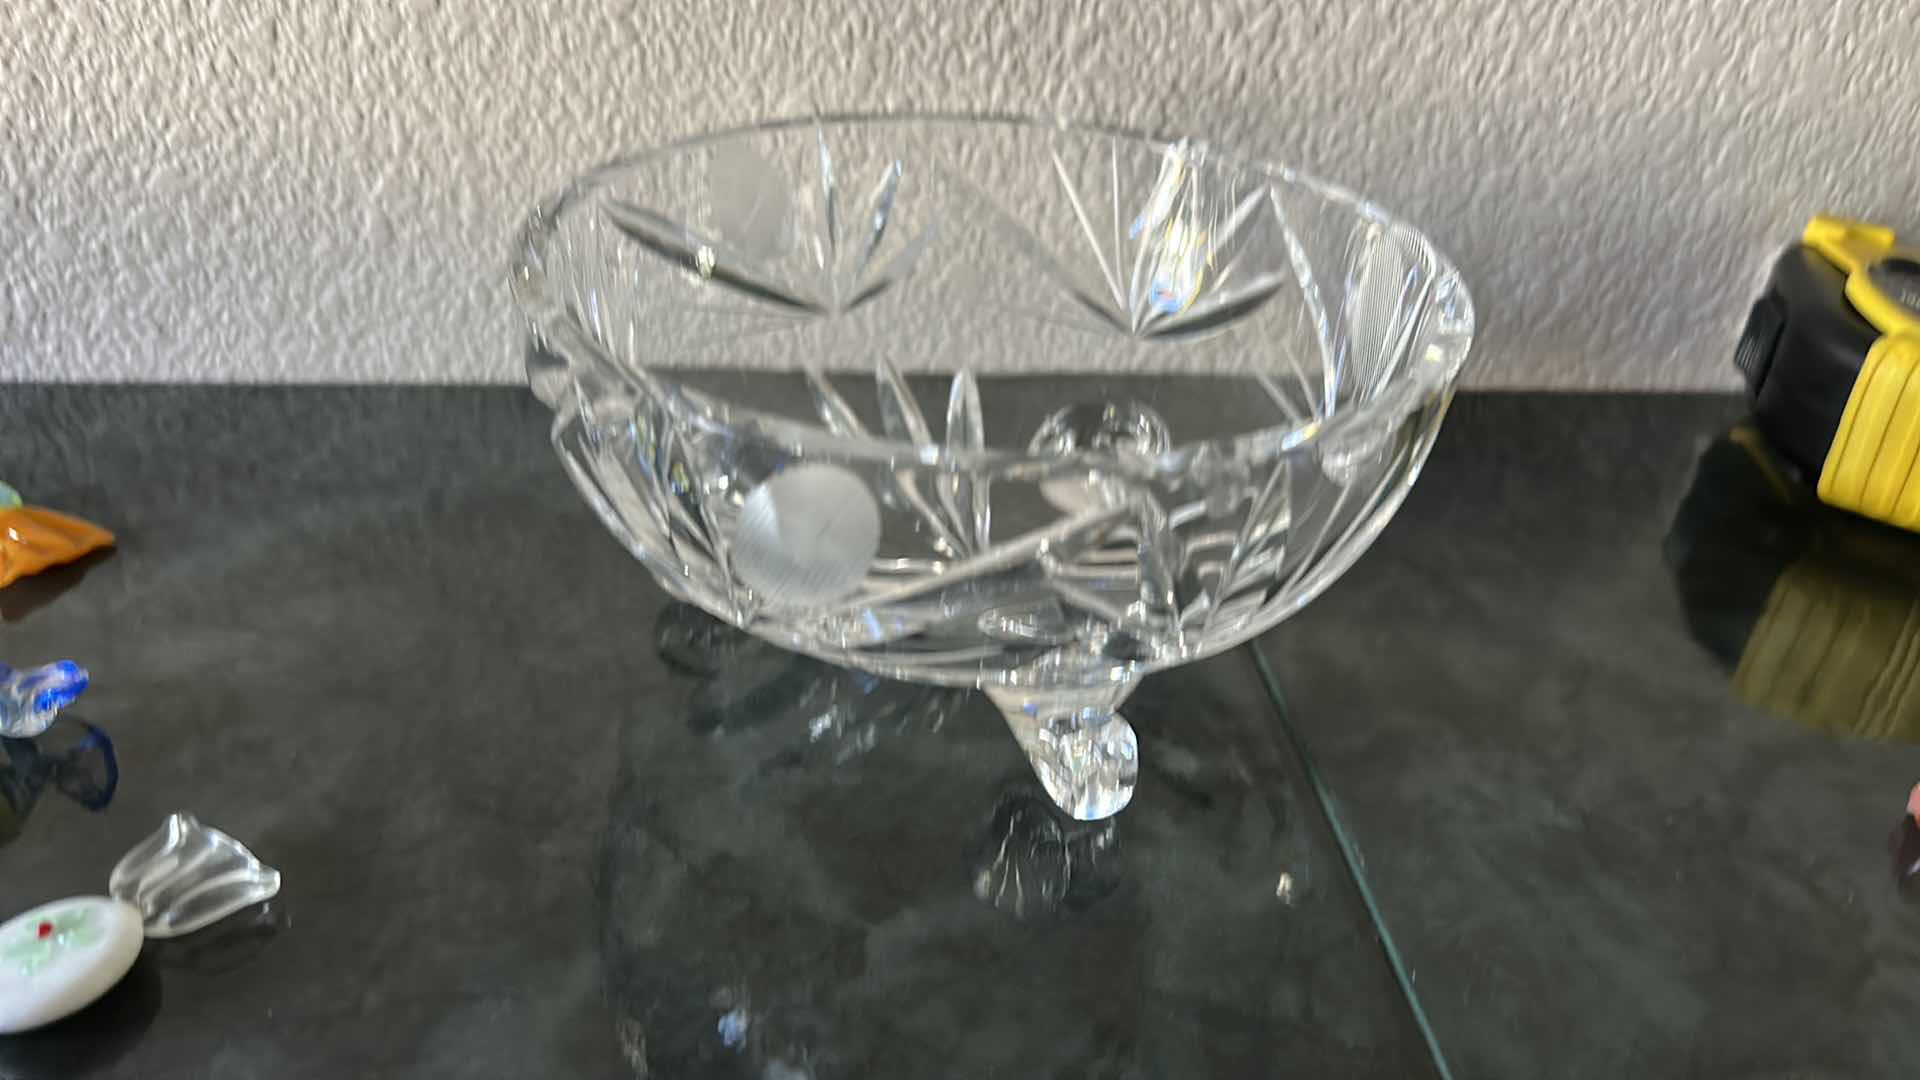 Photo 4 of CANDY DISH WITH GLASS CANDY, BOWL 6”x 3”